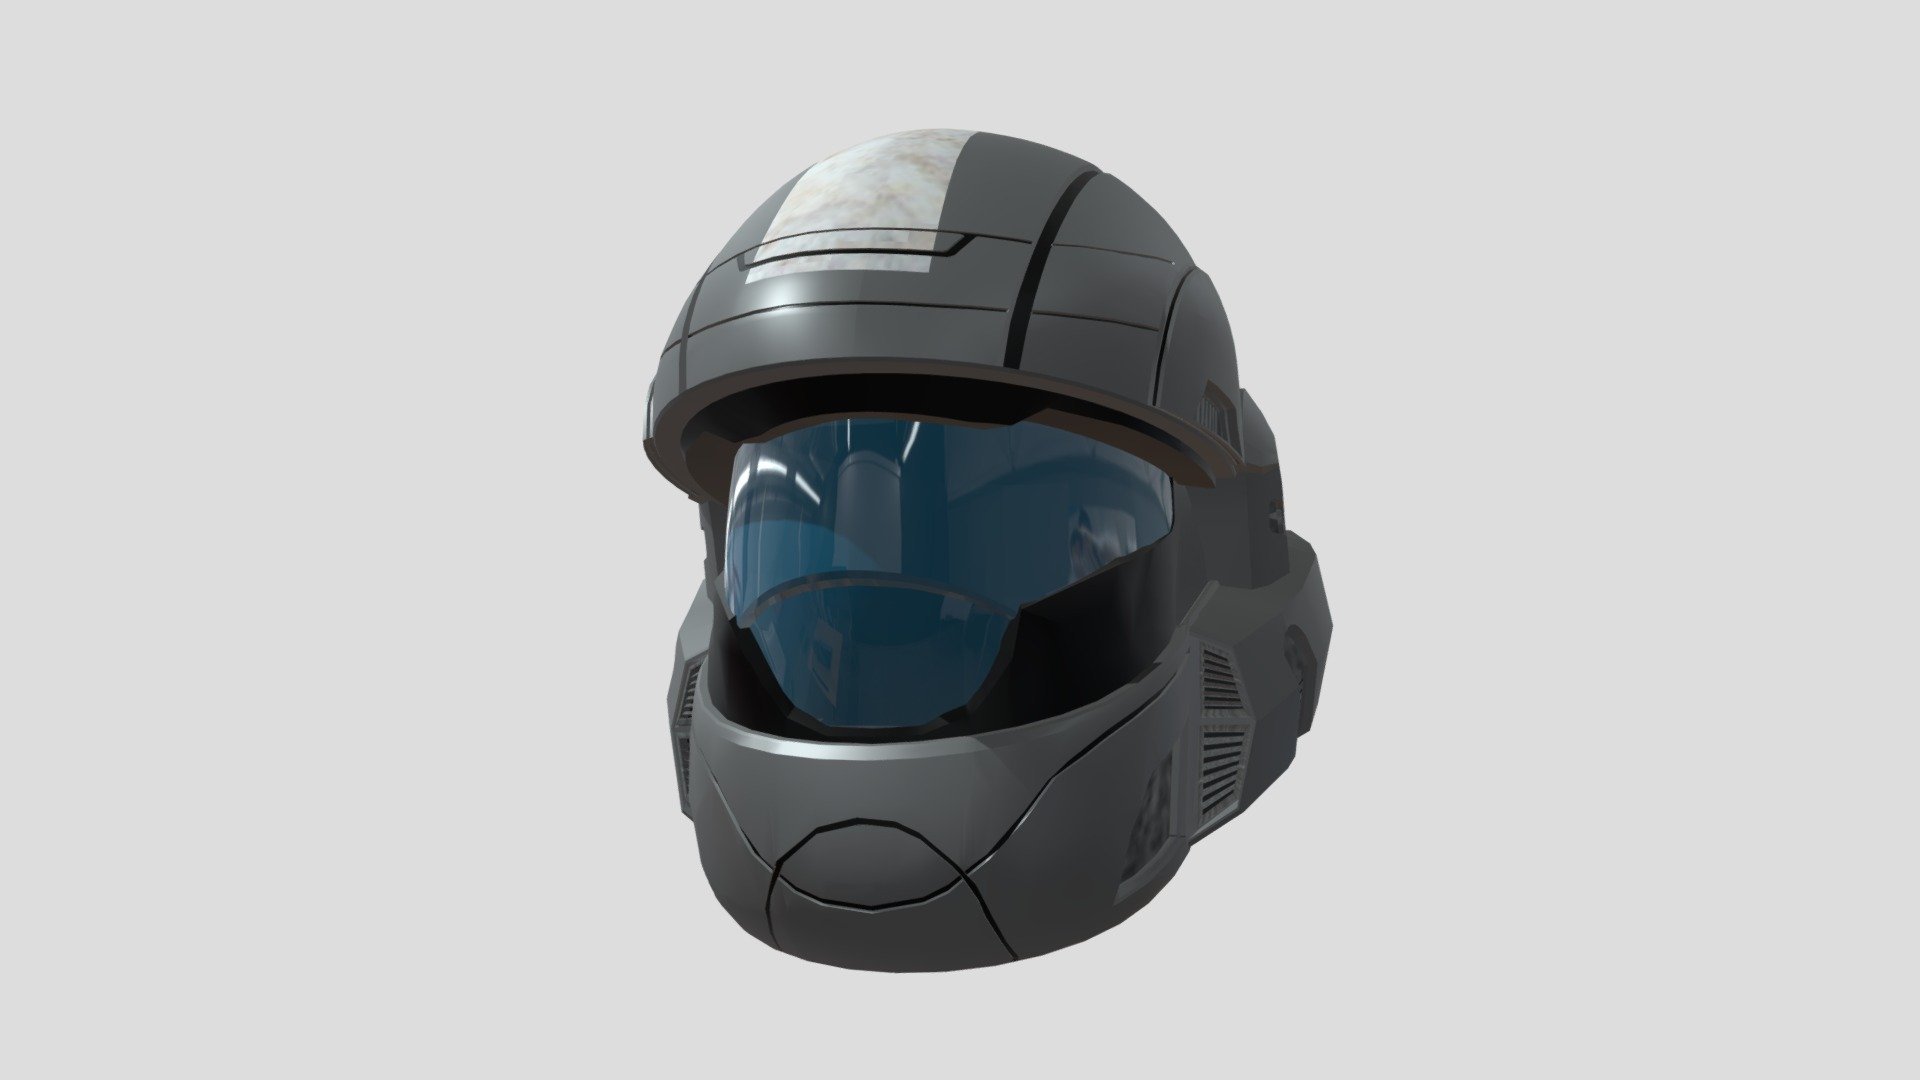 ODST Helmet from HALO